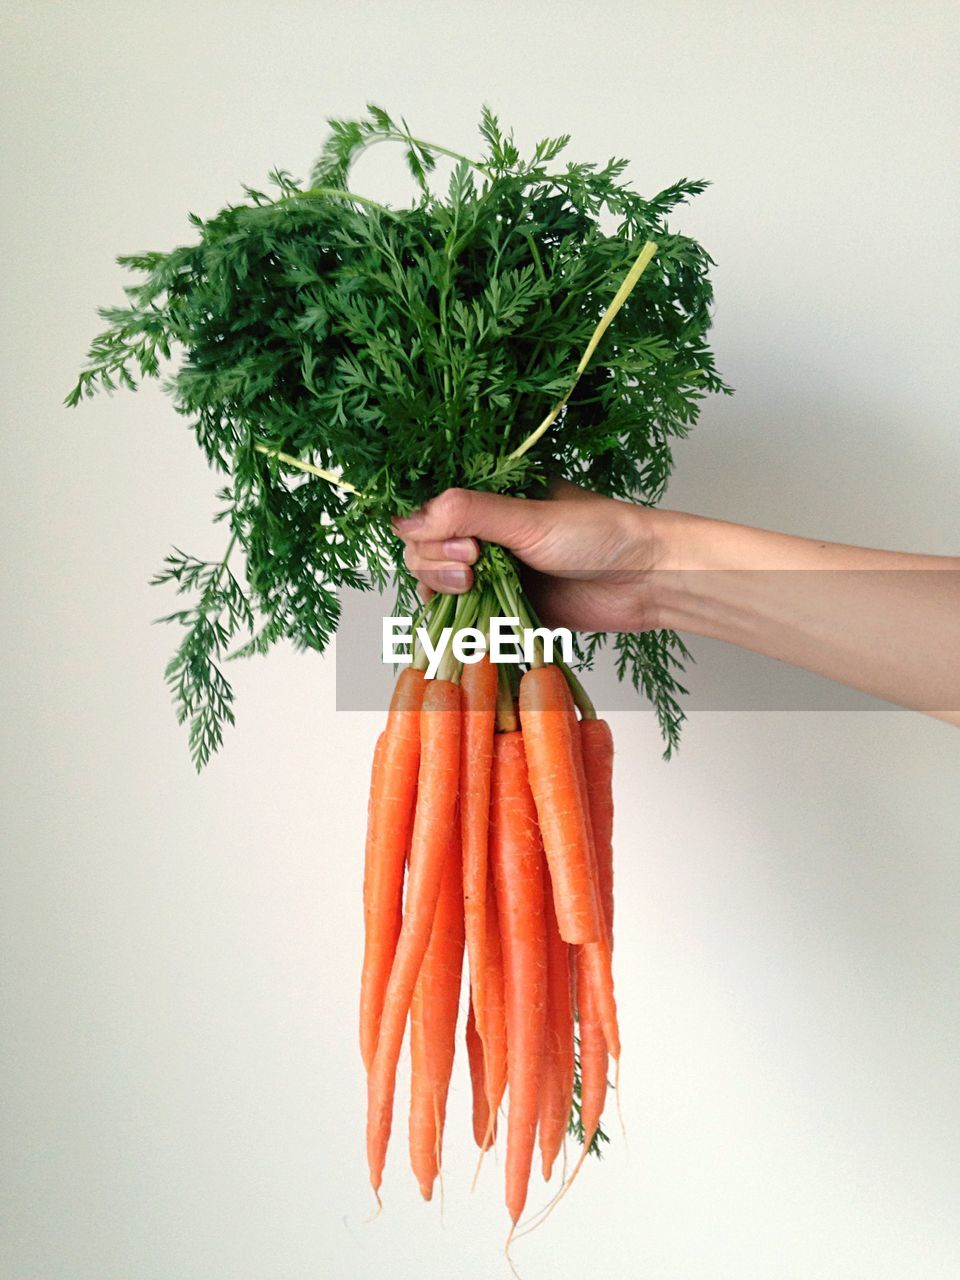 Hand holding bunch of carrots